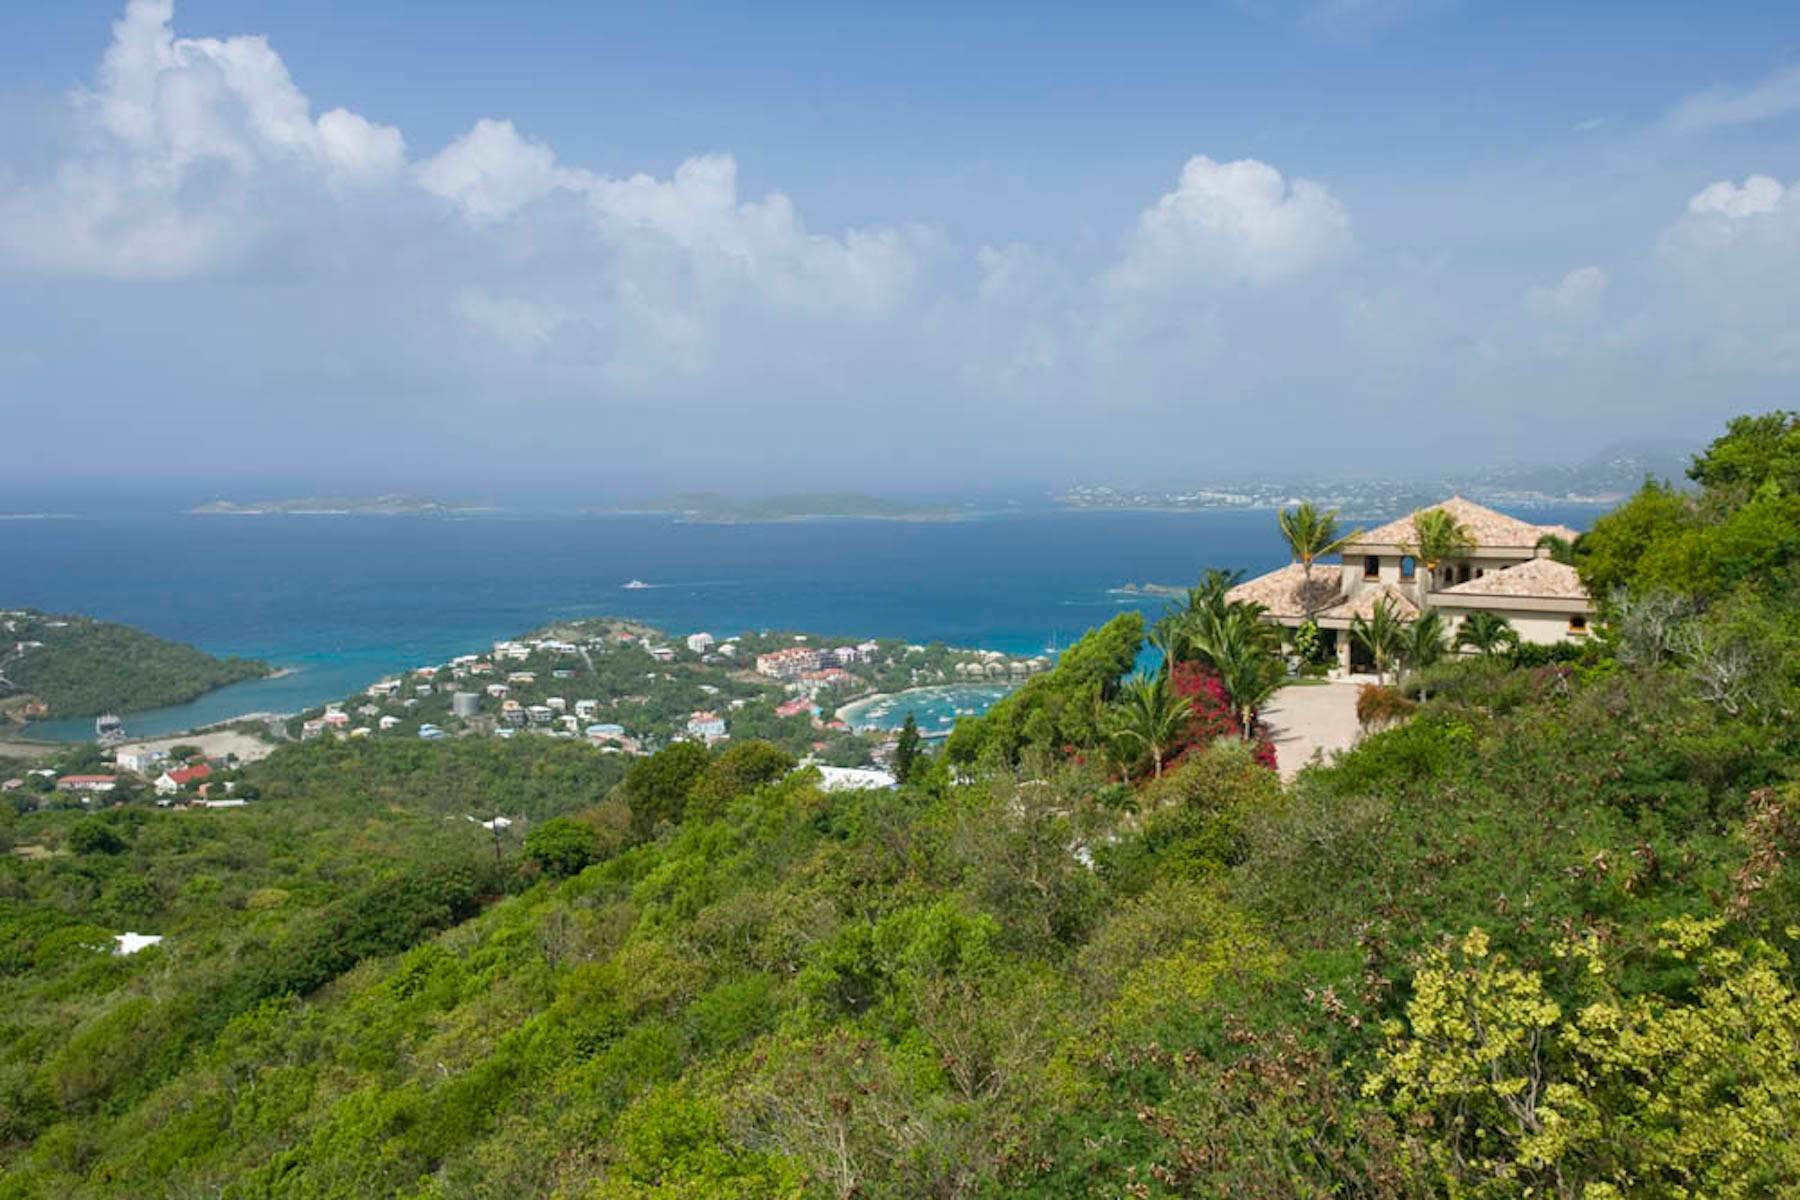 Land for Sale at 7 E-3 Consolidated Estate Pastory 7 E-3 Con Pastory St John, Virgin Islands 00830 United States Virgin Islands